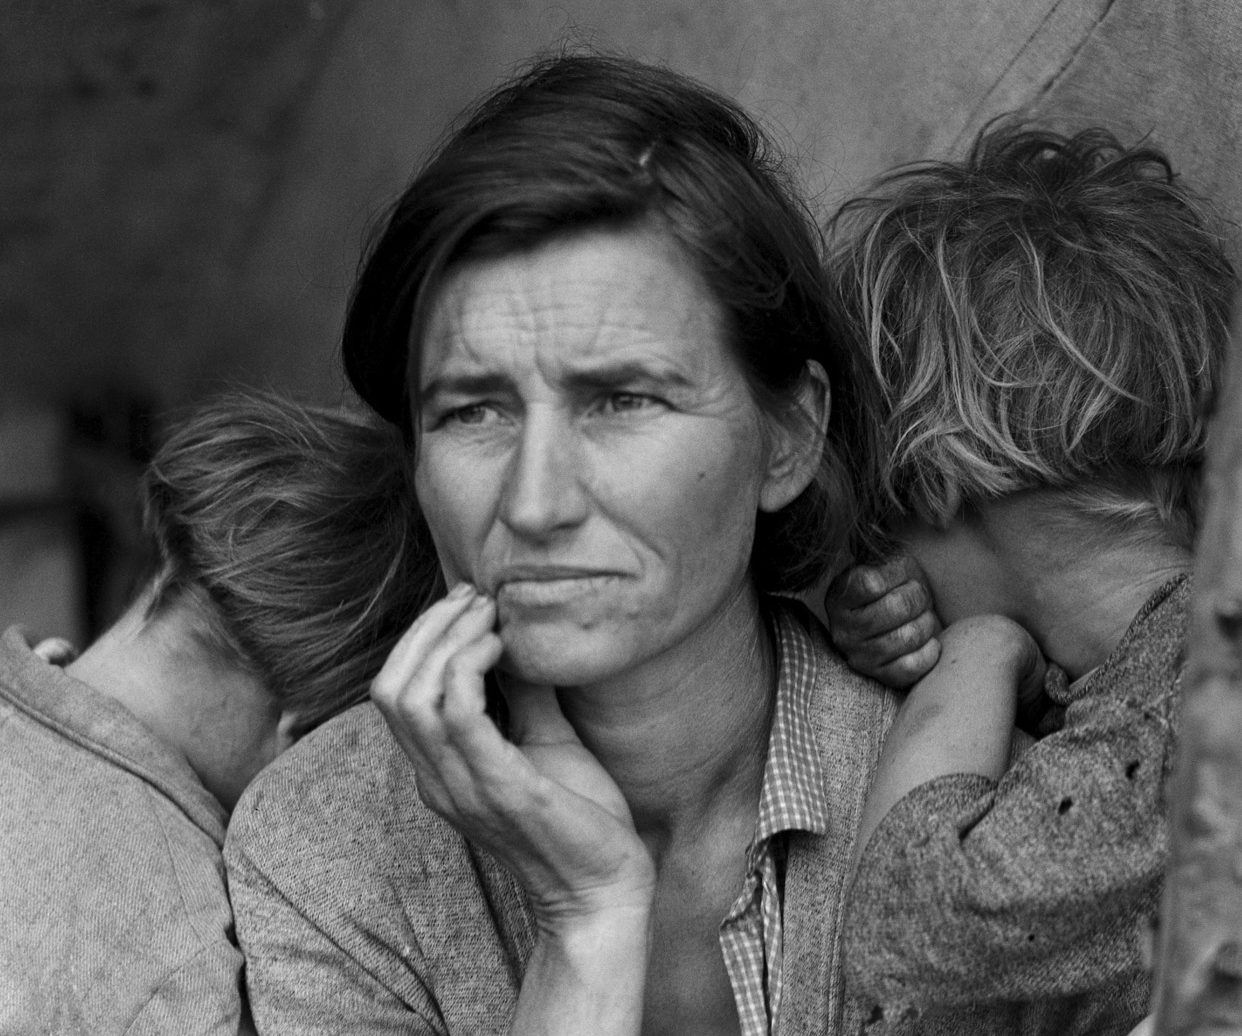 Migrant Mother -  This image of an impoverished woman with two of her seven children at a pea-pickers camp in Nipomo, California was shot by photographer Dorothea Lange in 1936. The photo was taken to document the plight of migrant agricultural workers and was published in newspapers, prompting the government to deliver food aid to the Nipomo camp. The woman, 32 years old at the time and identified decades later as Florence Owens Thompson, was critical of Lange and stated that she felt the photo was exploitative and wished it hadn’t been taken. She also expressed regret she hadn’t made any money from it. Thompson died at age 80 in 1983.